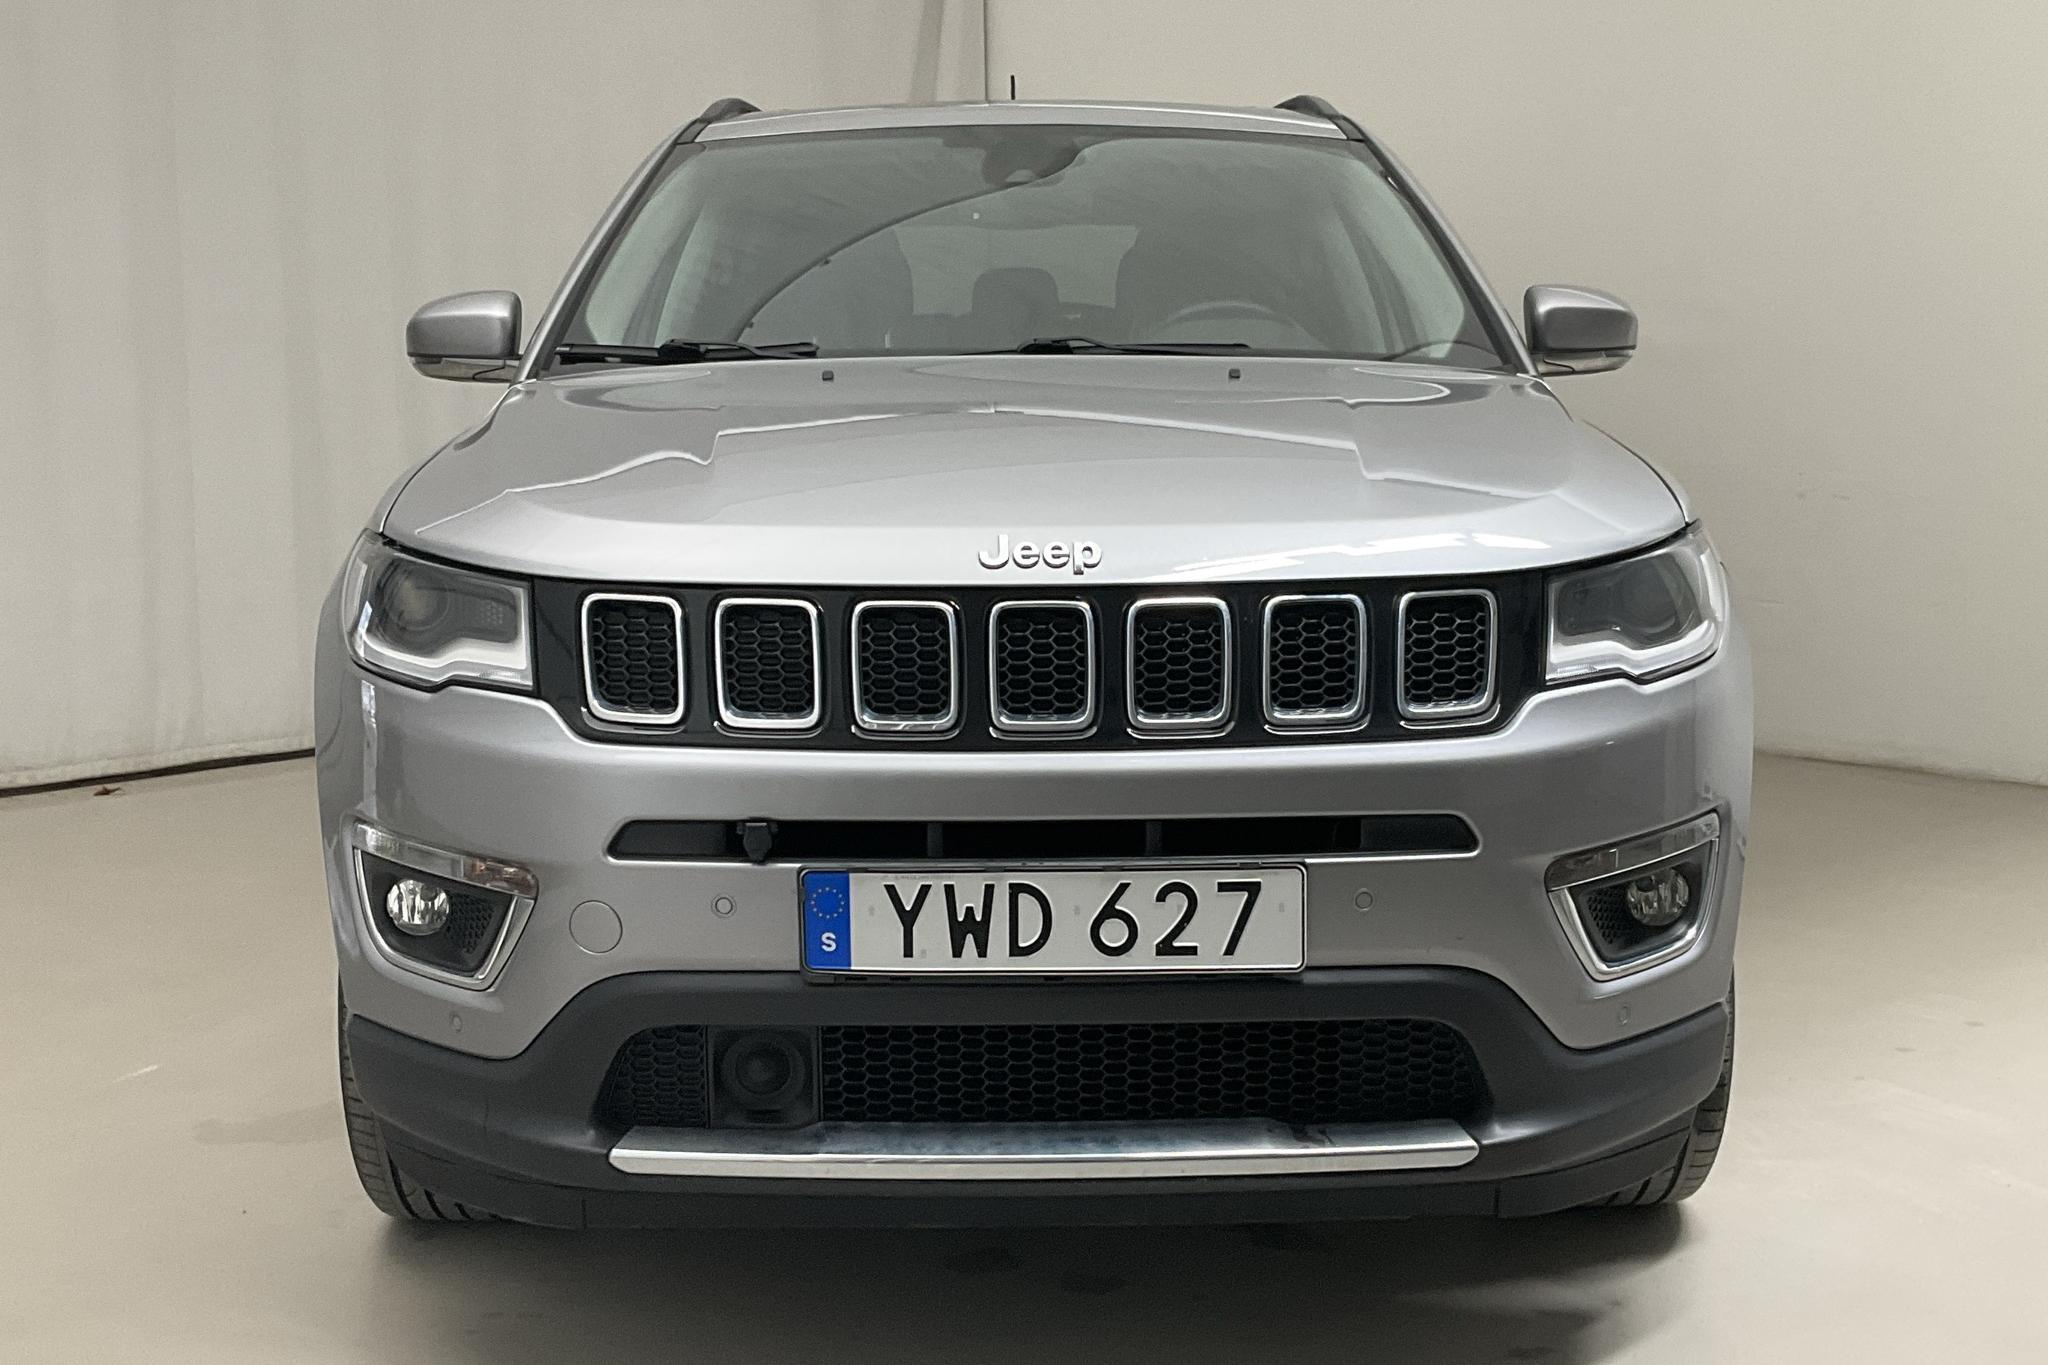 Jeep Compass 1.4 Multiair 4WD (170hk) - 50 840 km - Automatic - gray - 2019